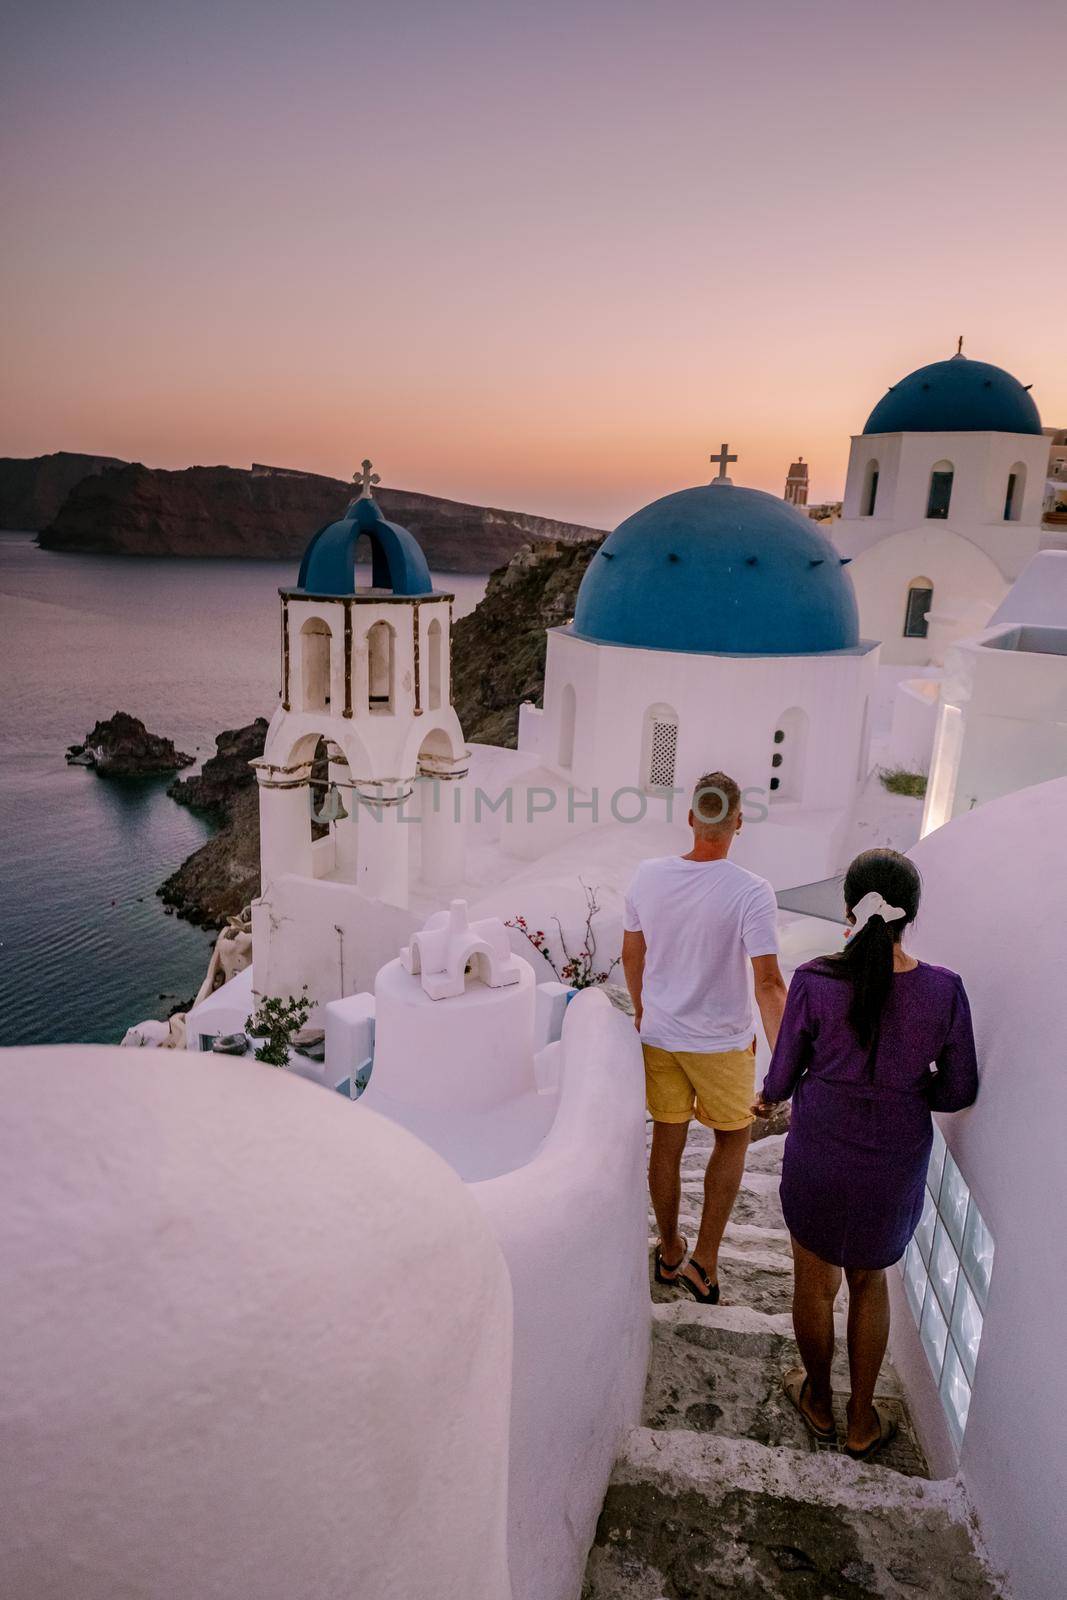 Santorini Greece, young couple on luxury vacation at the Island of Santorini watching sunrise by the blue dome church and whitewashed village of Oia Santorini Greece during sunrise by fokkebok